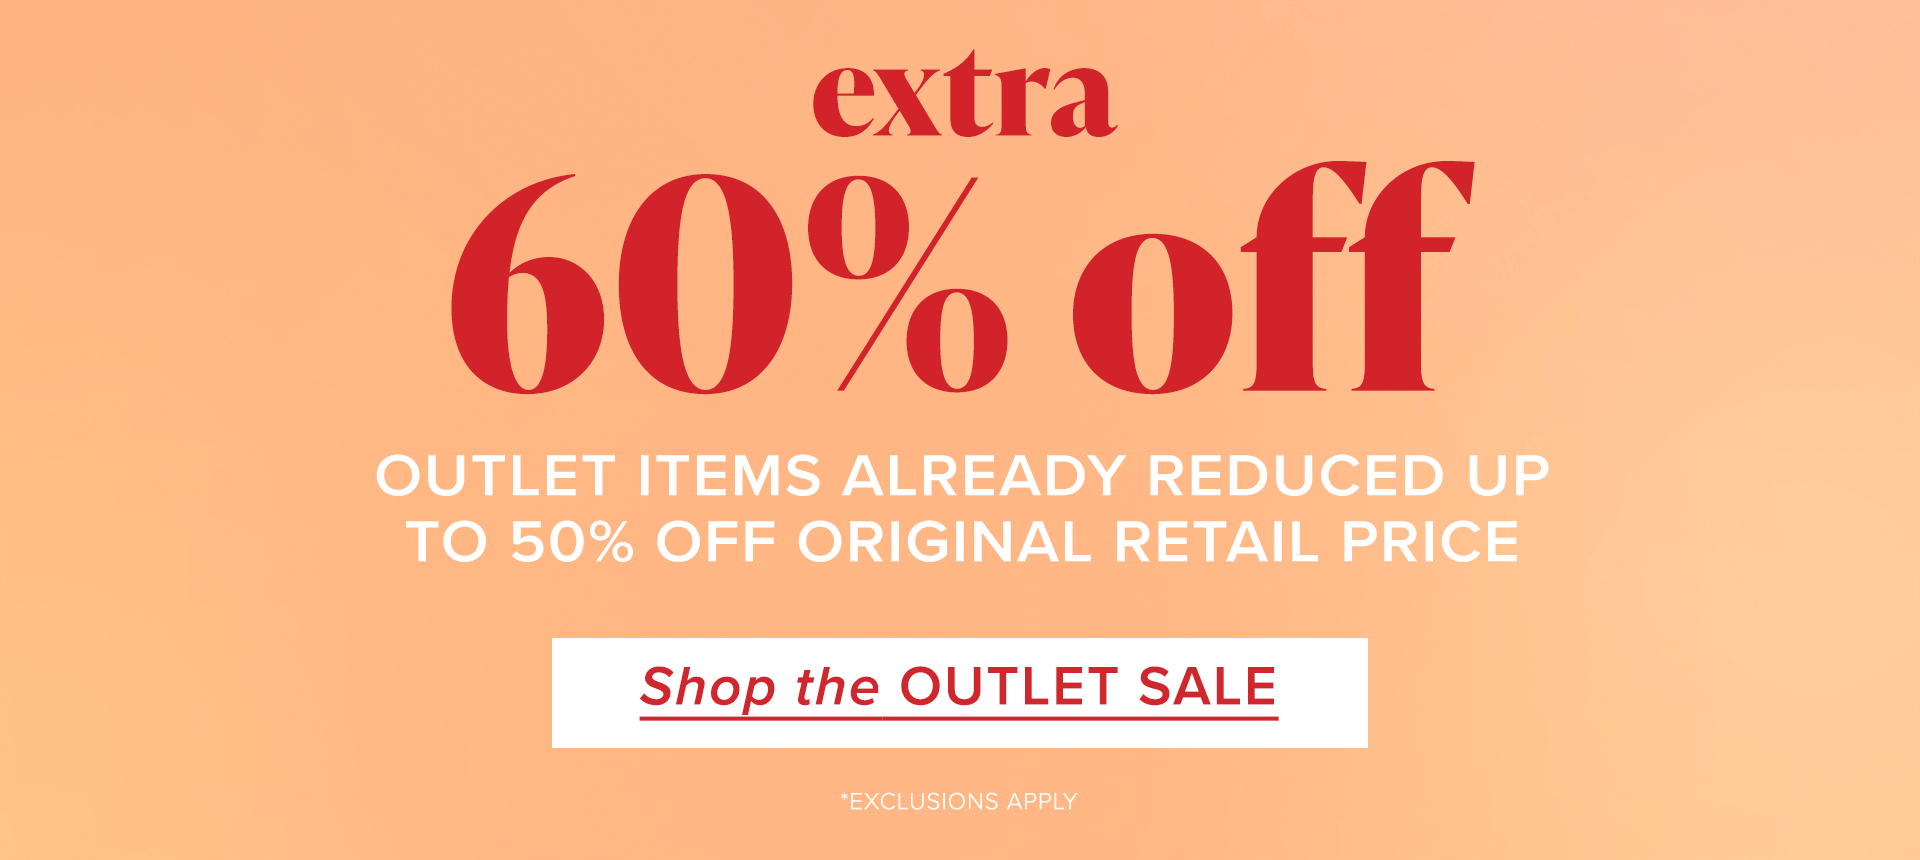 Extra 60% off Outlet